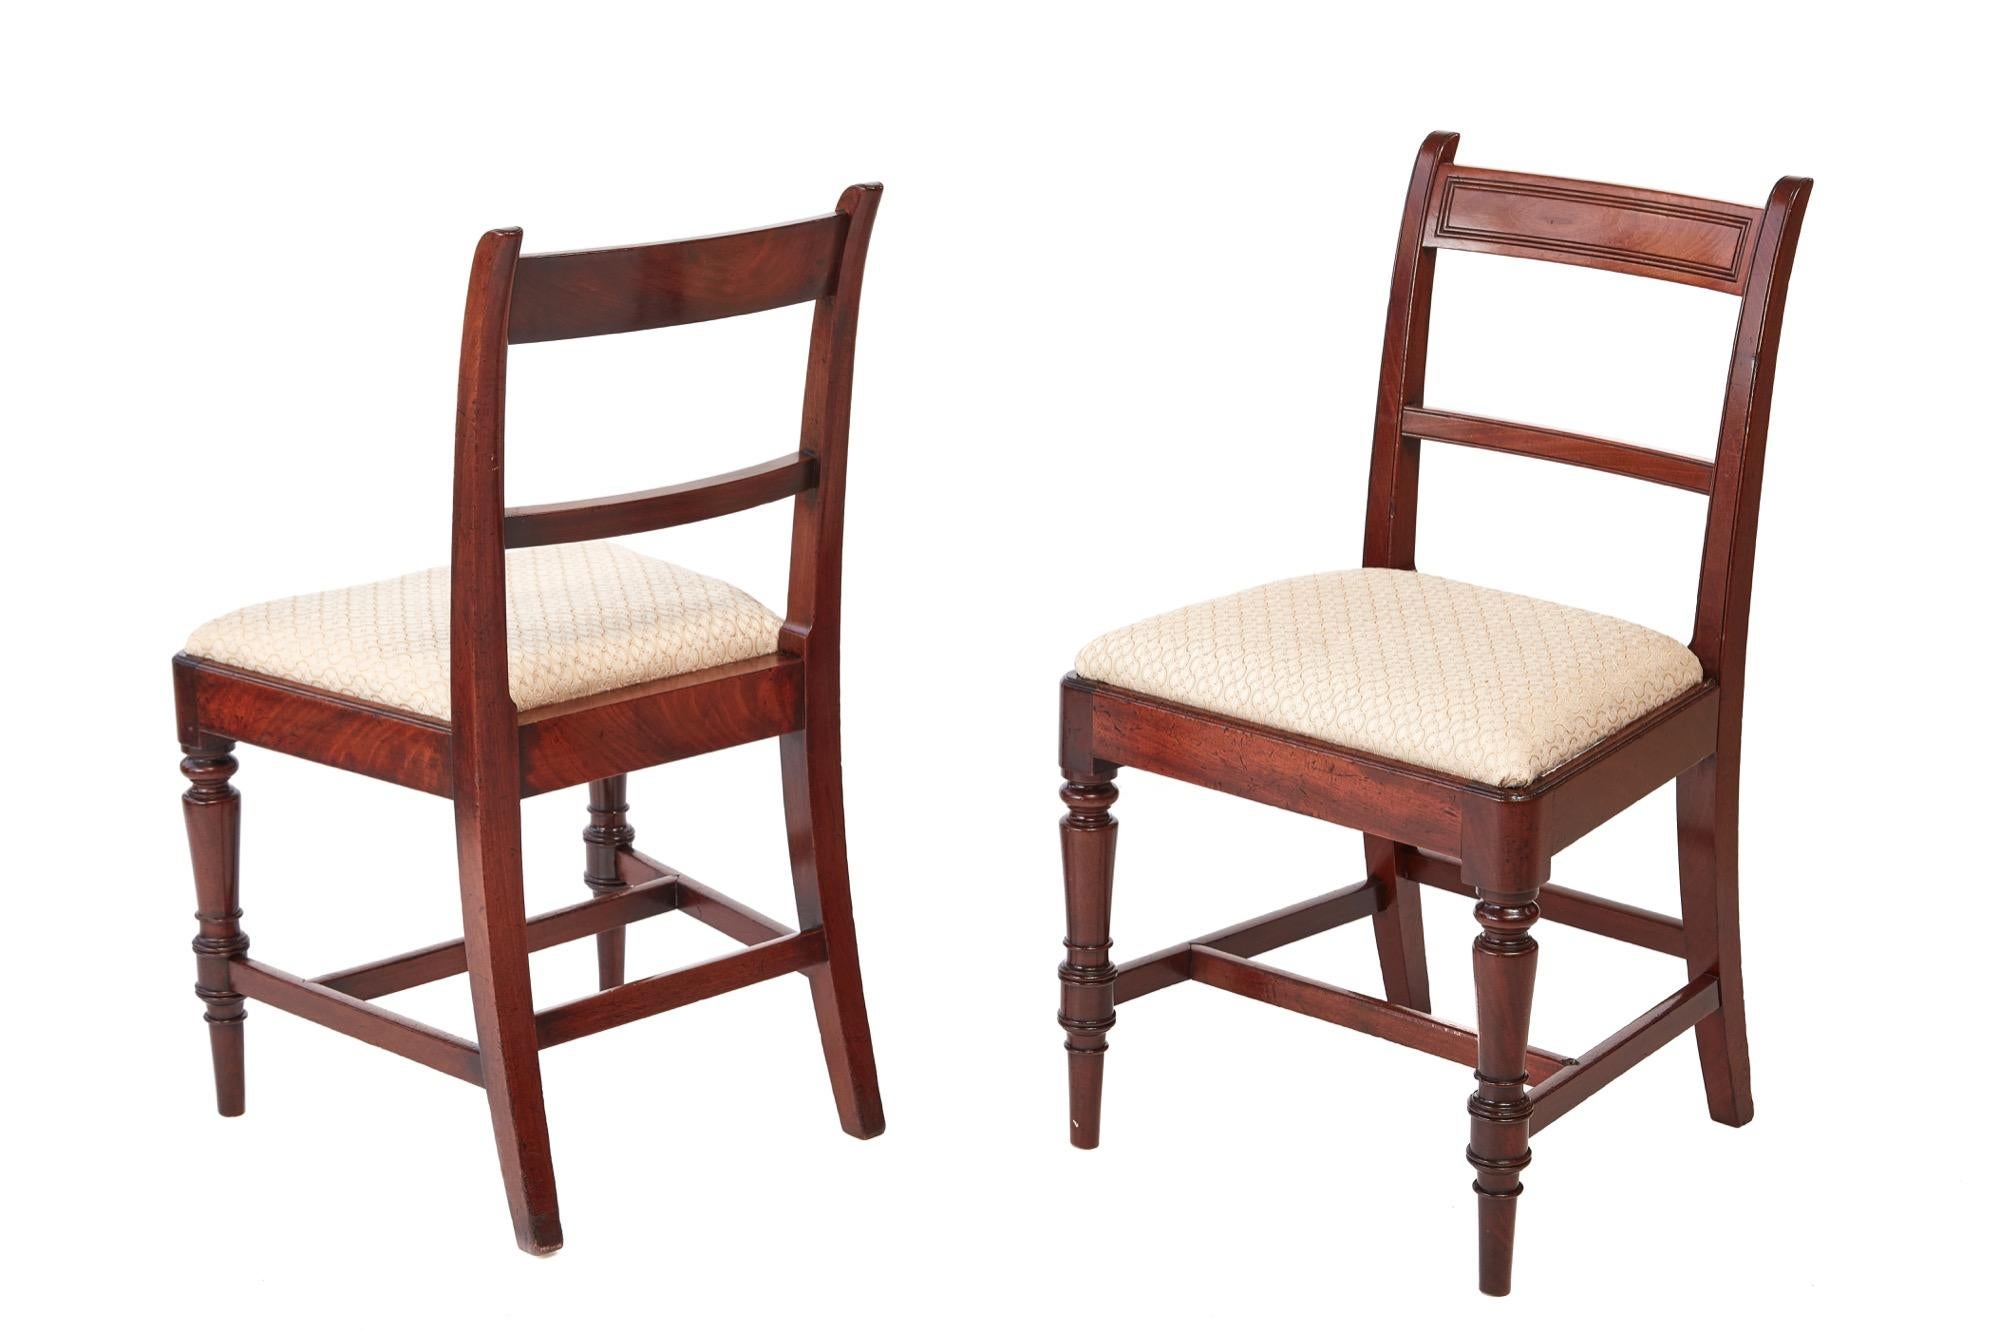 Fine quality set of 6 George III antique mahogany dining chairs. Five single and one carver. Elegant shaped top rail with a reeded panel and reeded centre rail. The carver has attractive shaped arms supported by shaped turned supports. They are all